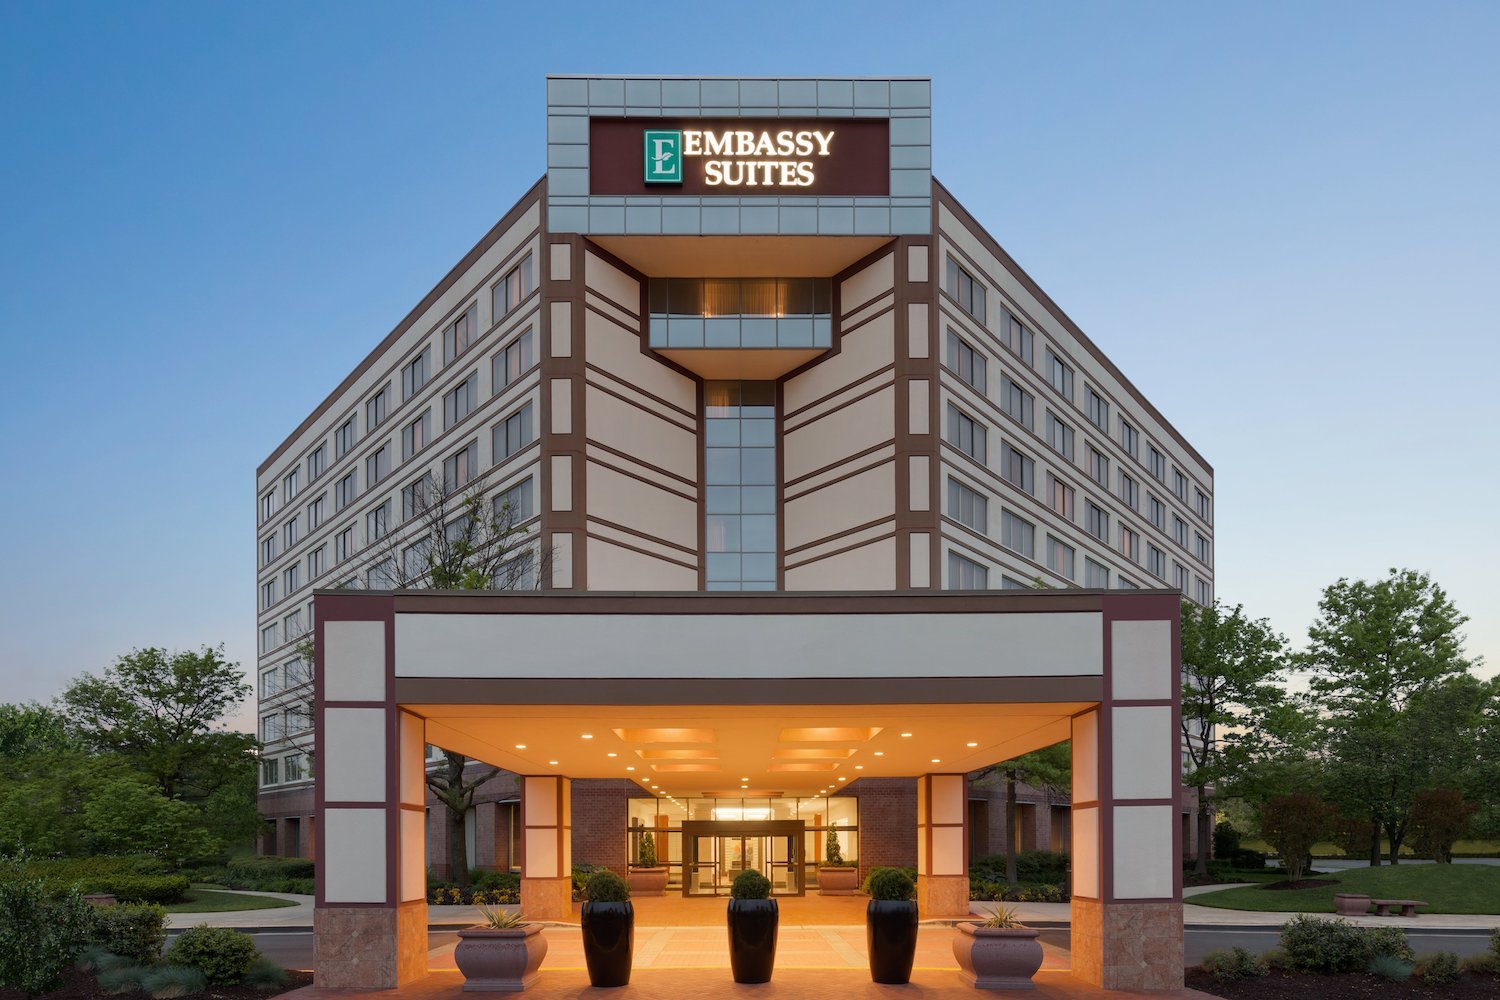 Photo of Embassy Suites by Hilton Baltimore at BWI Airport, Linthicum, MD